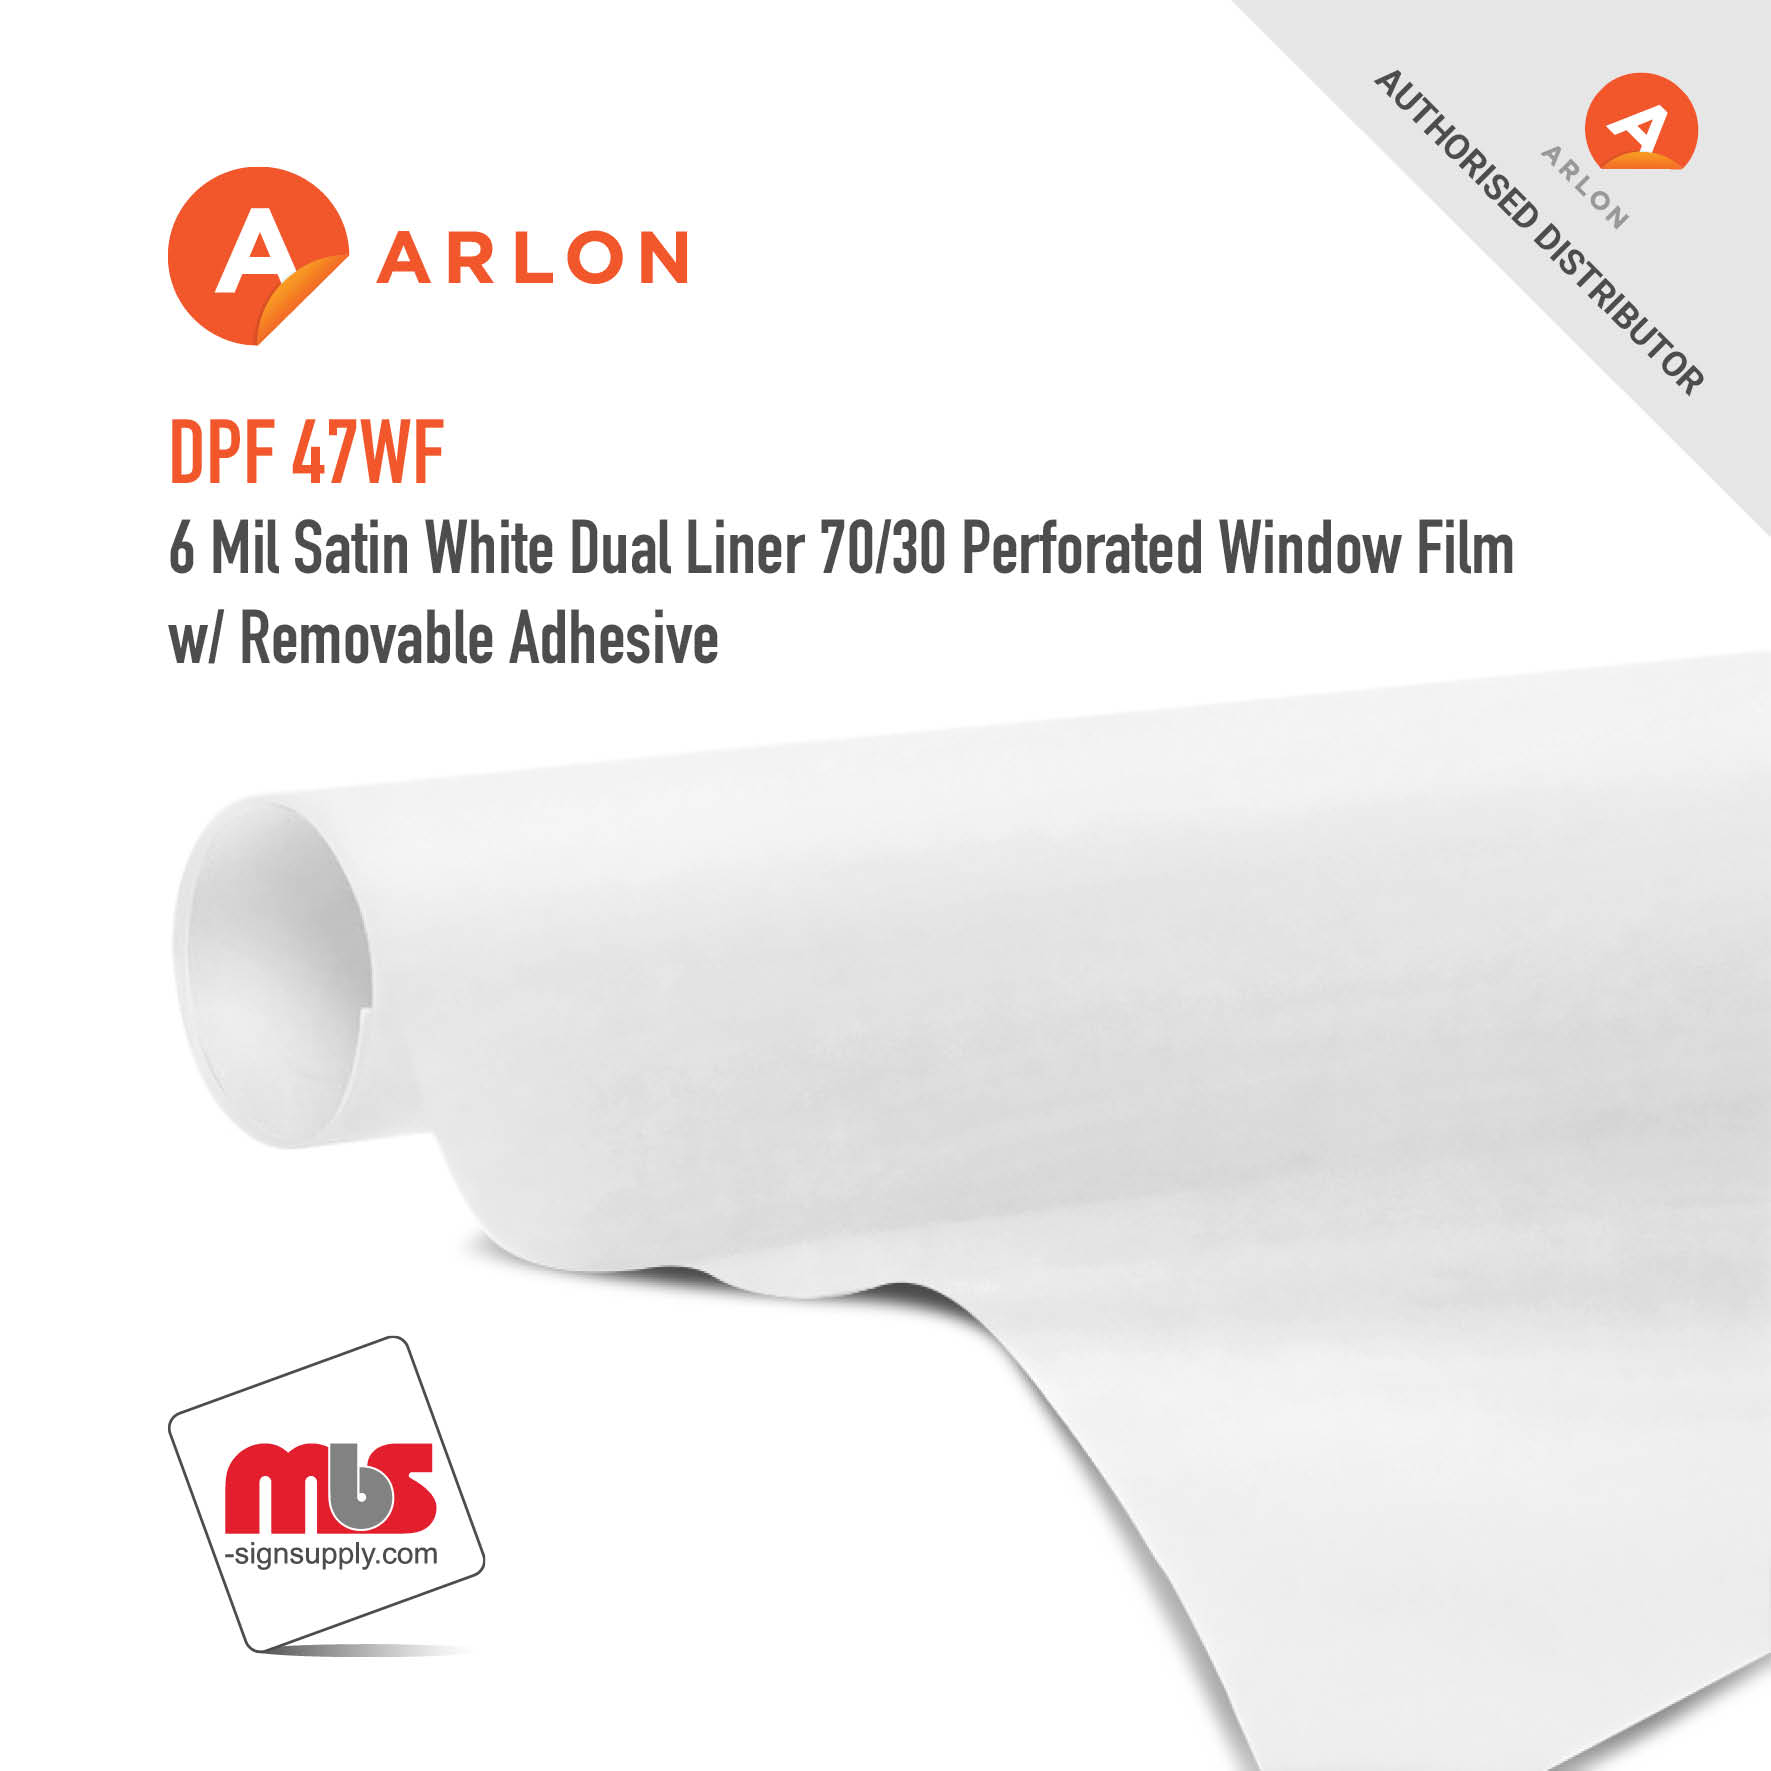 54'' X 54 Yard Roll - Arlon DPF 47WF 6 Mil Satin White Dual Liner 70/30 Perforated Window Film w/ Removable Adhesive